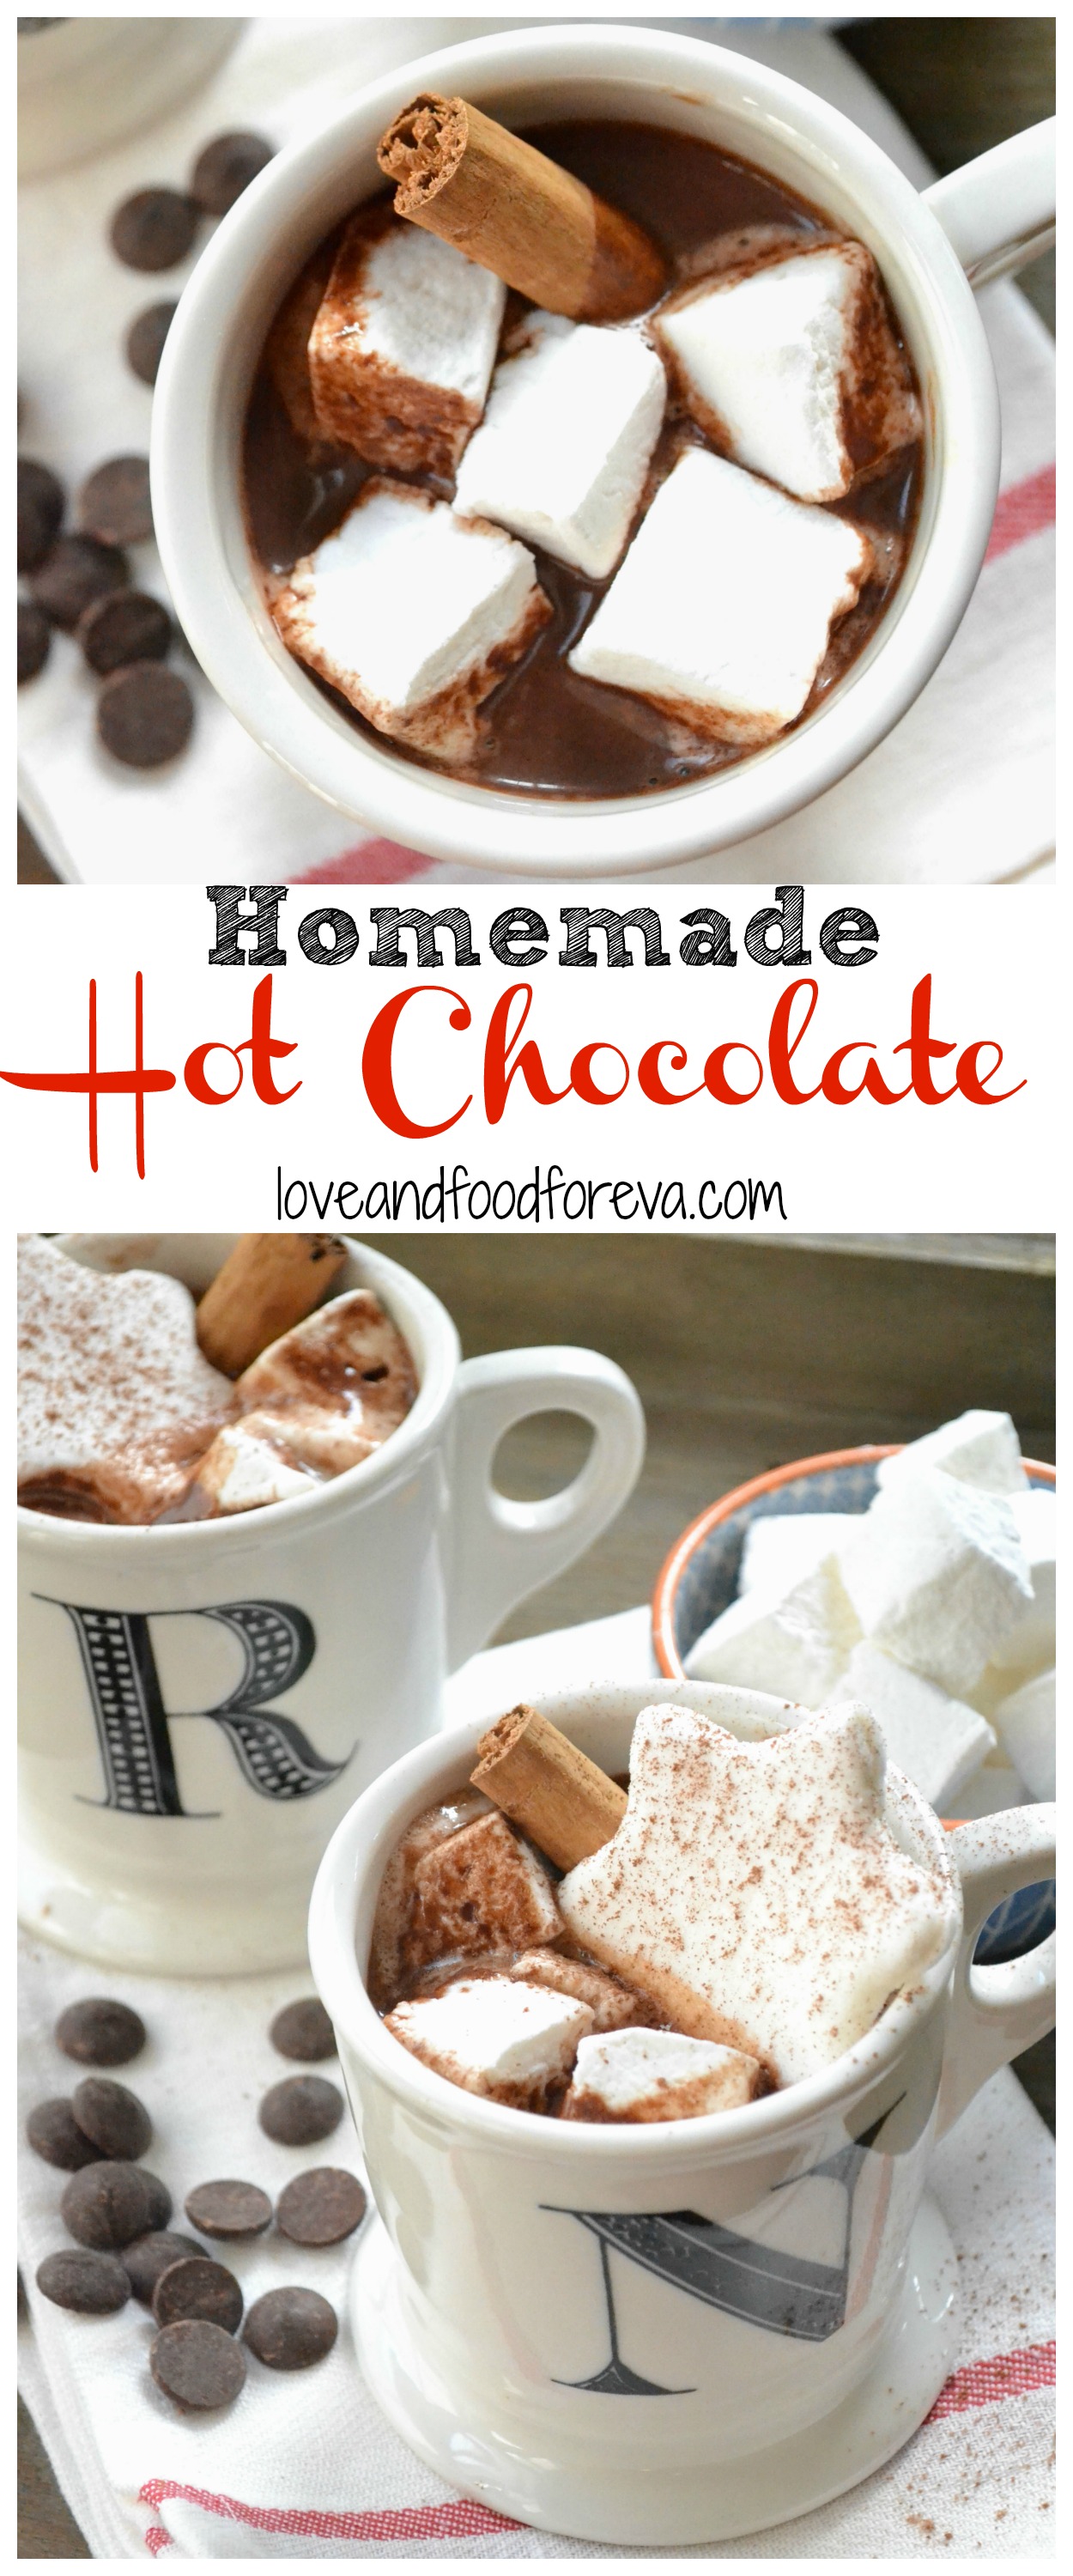 Perfect Hot Chocolate will warm you up in no time!